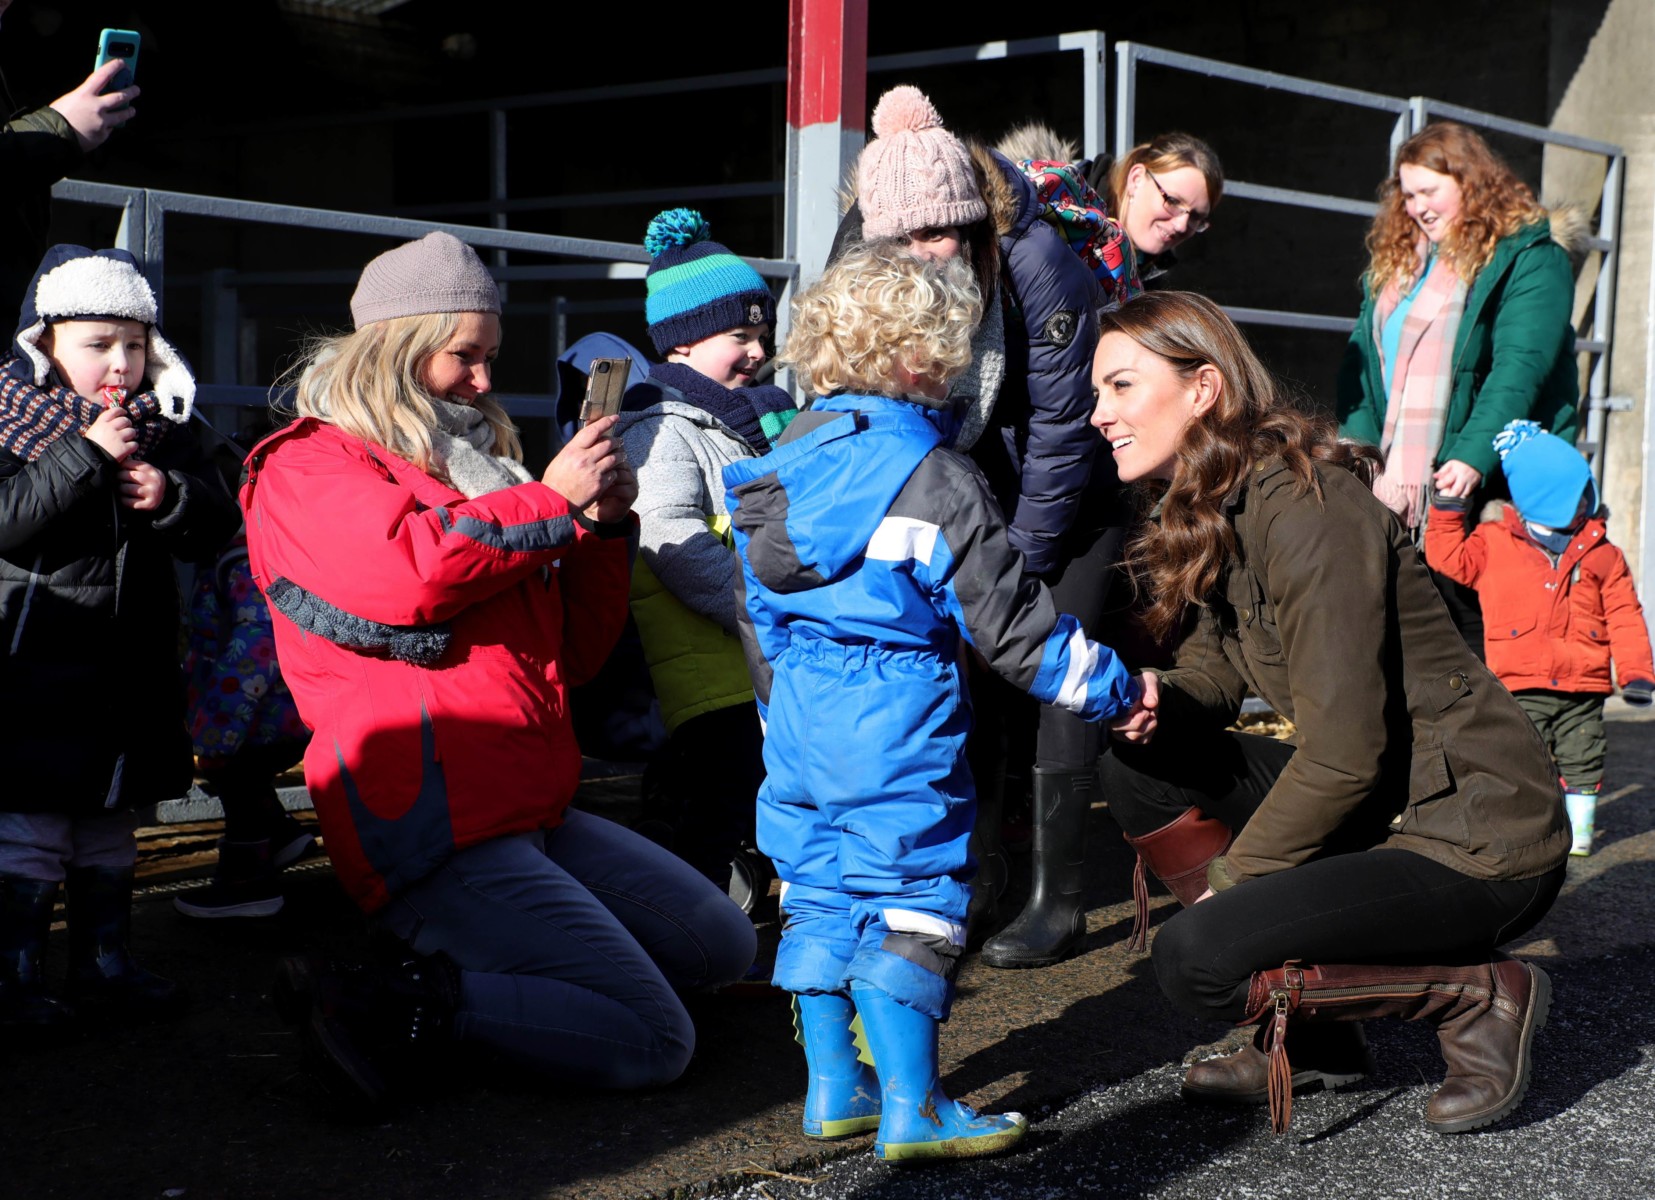 Kate Middleton immediately crouched down to chat to some of the younger members in the crowd waiting to meet her